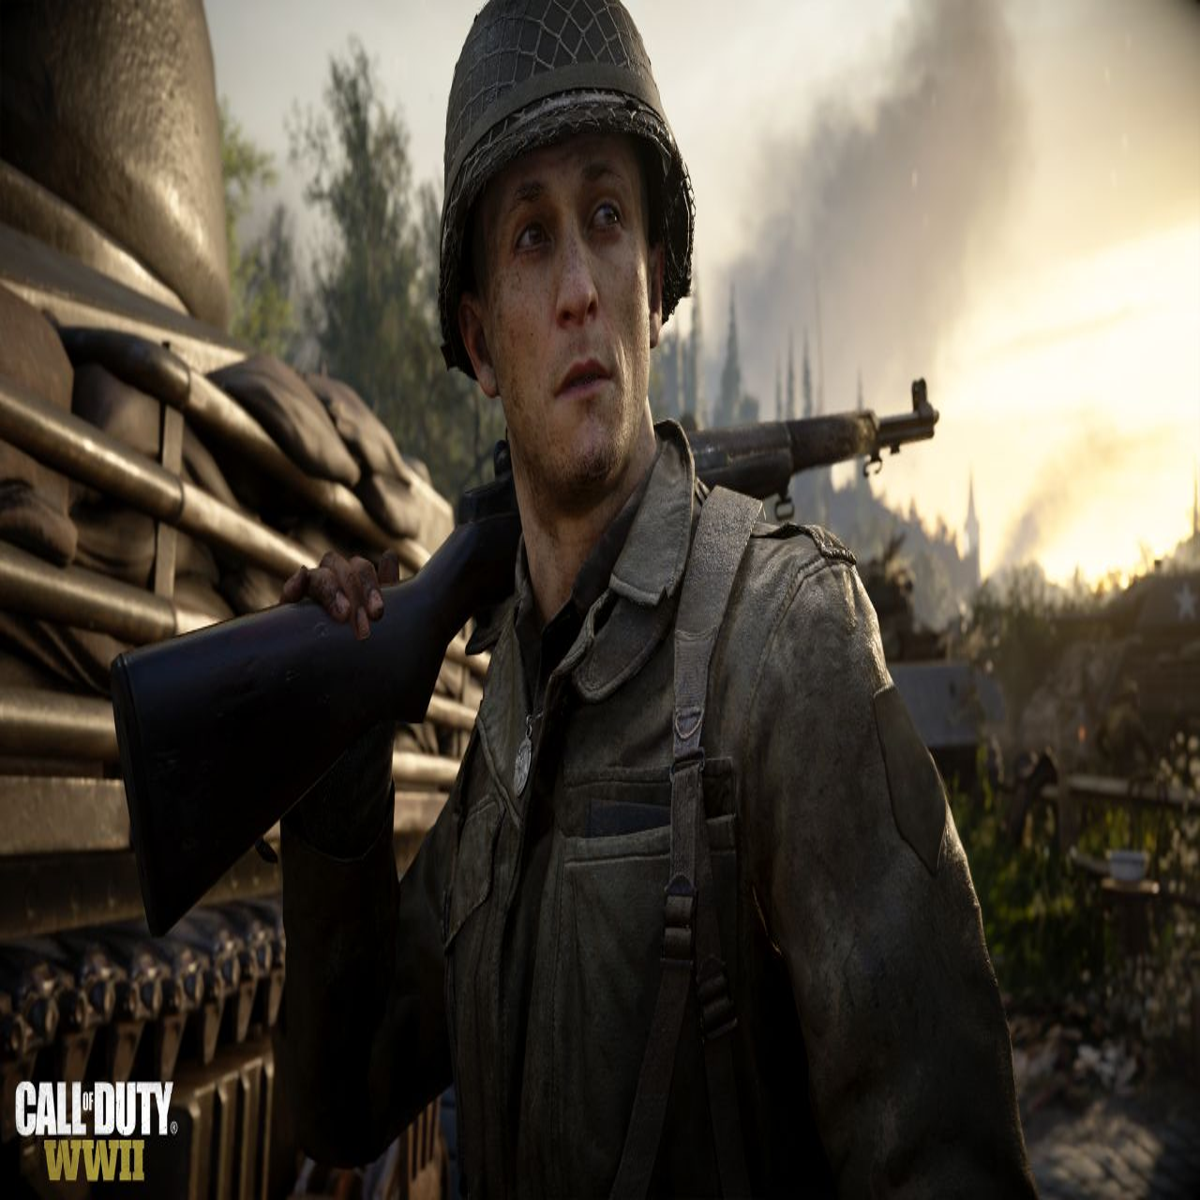 Call of Duty: WWII has already made $1 billion in sales